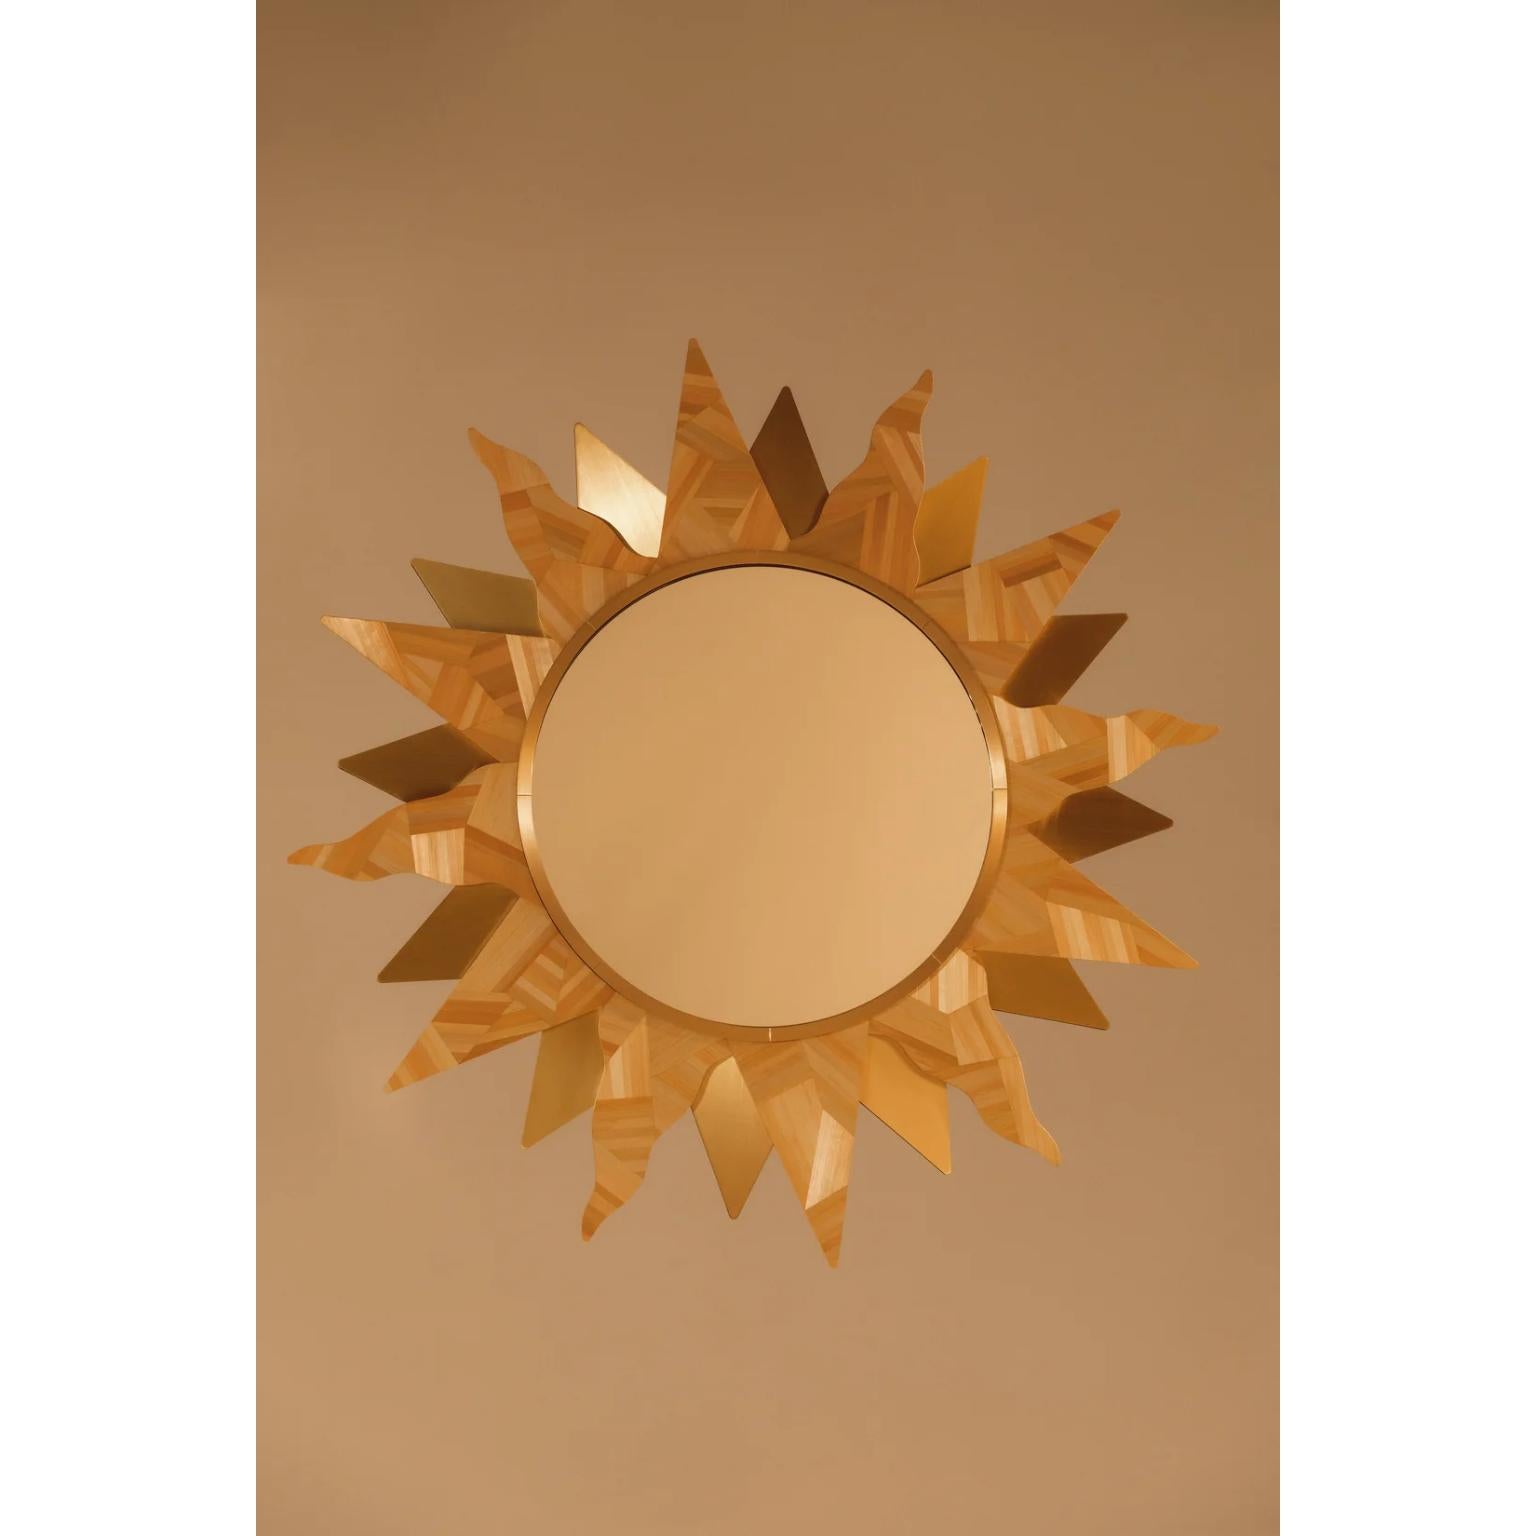 Sun Wall Mirror by Ruda Studio
Dimensions: Ø 100 x H 100 cm.
Materials: MDF, painted rye straw, brass and mirror.
Weight: 10 kg.

Dimensions are customizable. Please contact us. 

Our mission is to create objects with soul and meaning. Inspired by